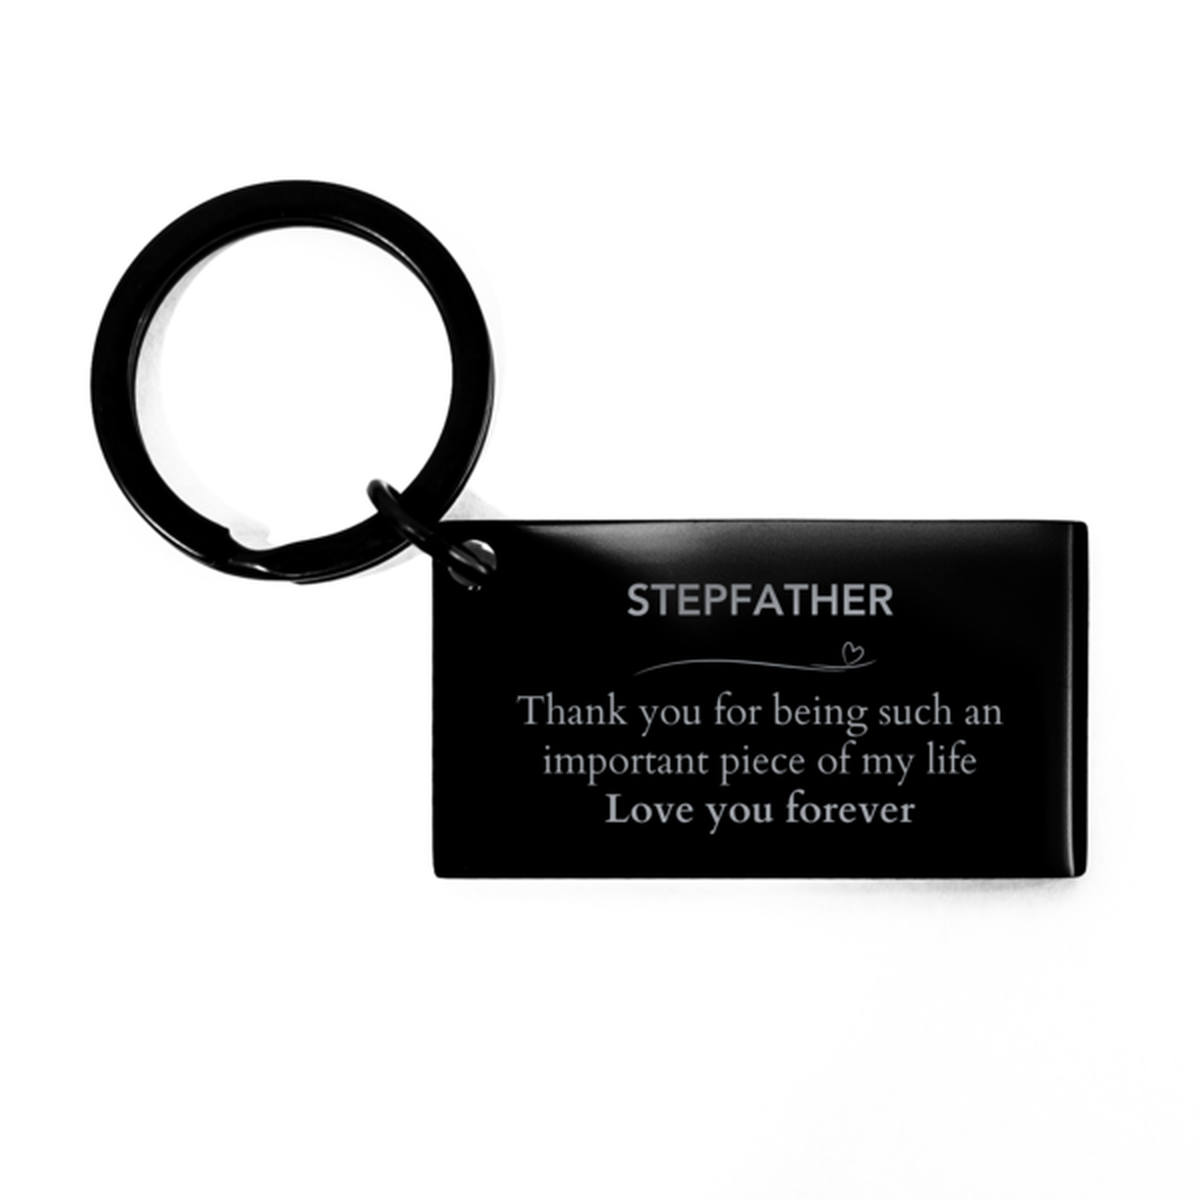 Appropriate Stepfather Keychain Epic Birthday Gifts for Stepfather Thank you for being such an important piece of my life Stepfather Christmas Mothers Fathers Day